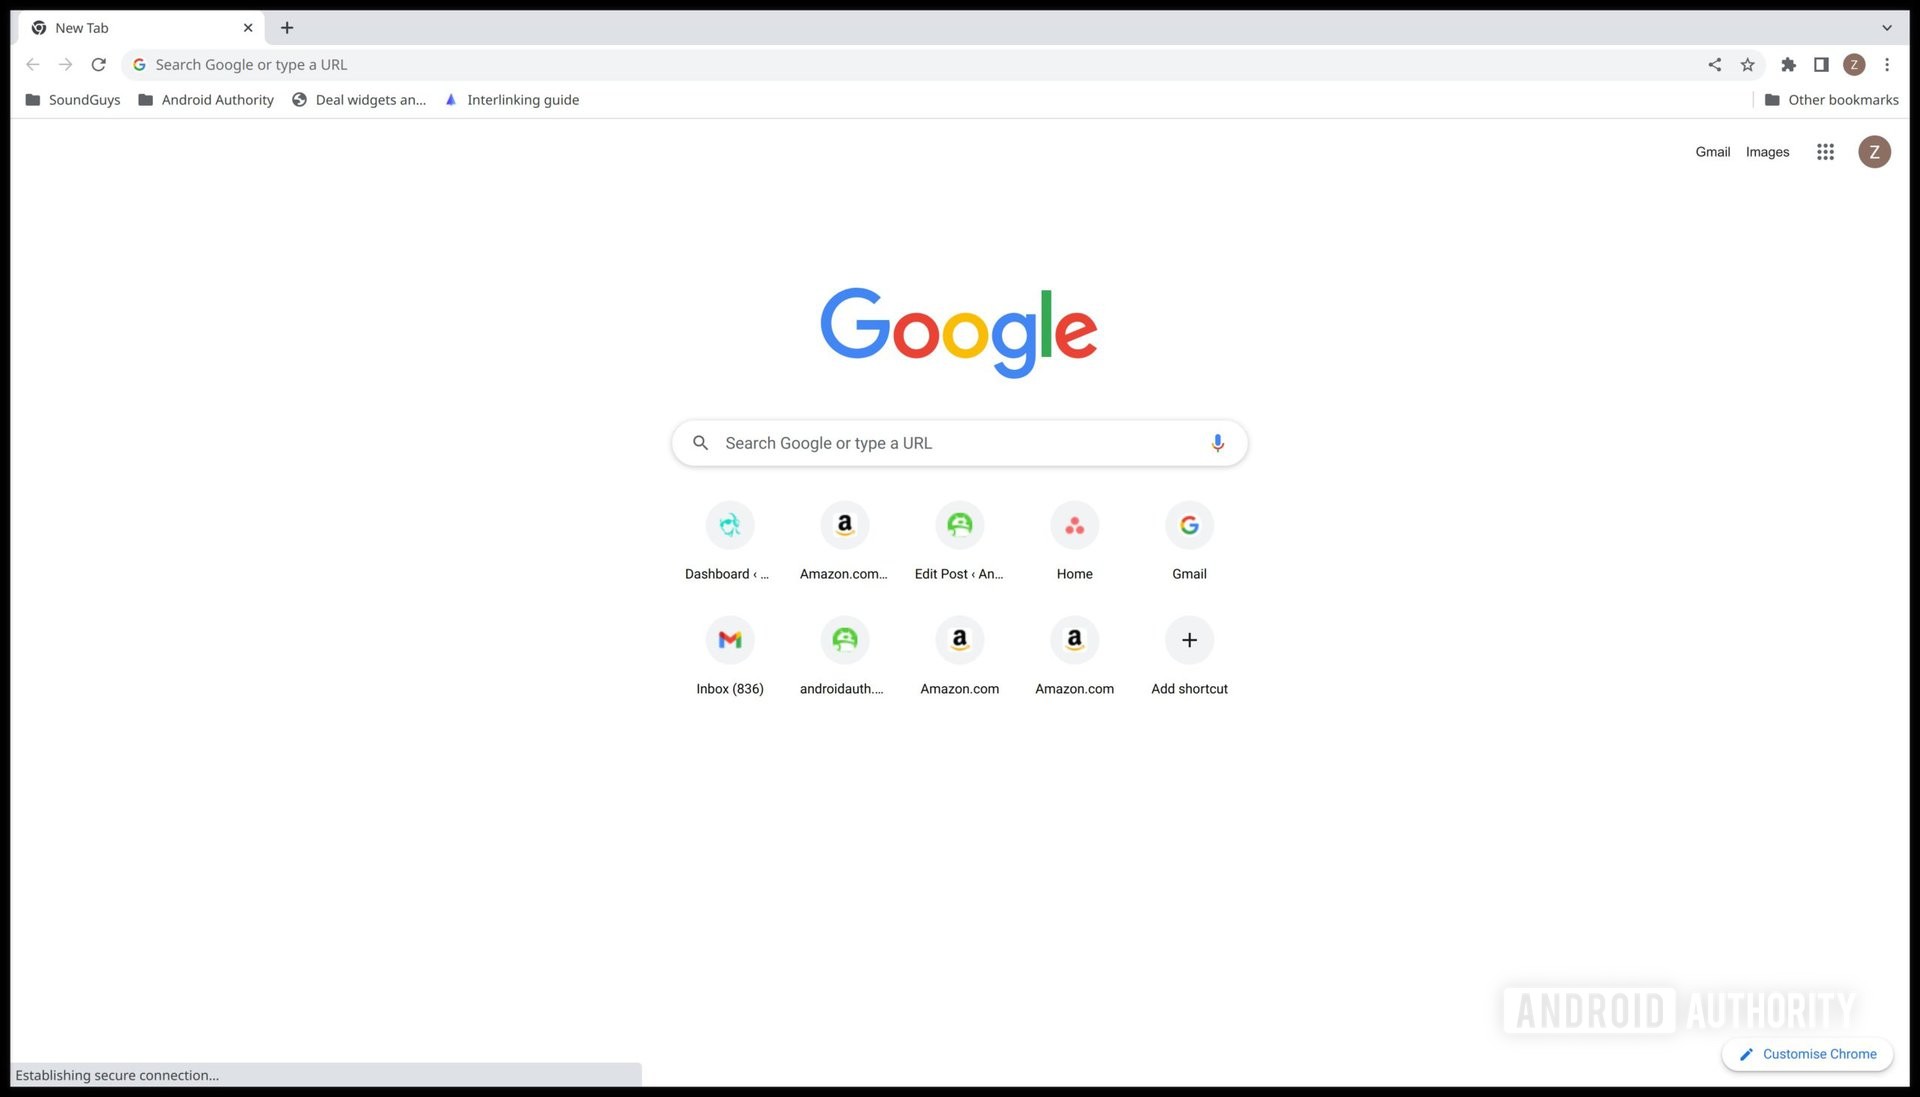 How to change the Google background in Chrome - Android Authority